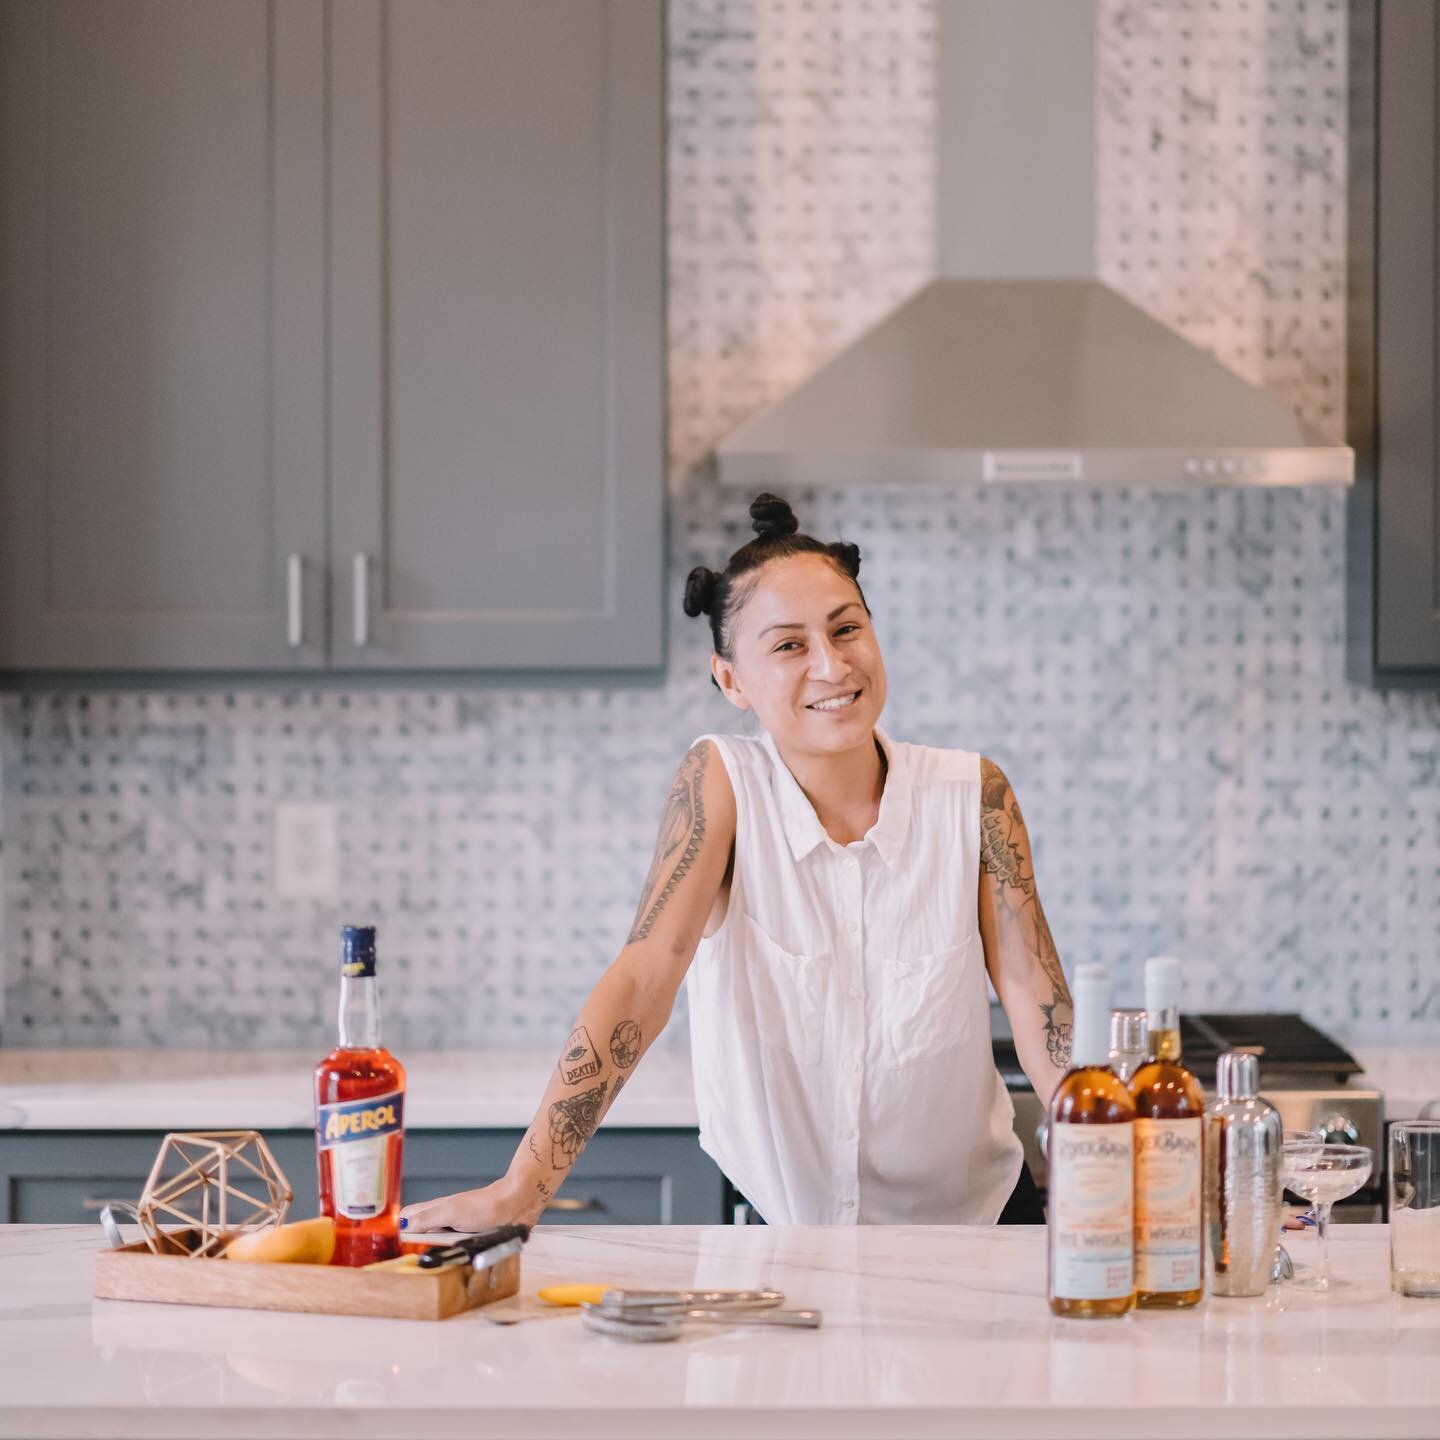 Meet Deiara Stolearenco (@dae.mona). Born and raised in the Bay Area with roots in New Orleans, Deiara began bartending while attending Xavier, and has worked in nearly every capacity in the industry. Gaining experience from an eclectic assortment of